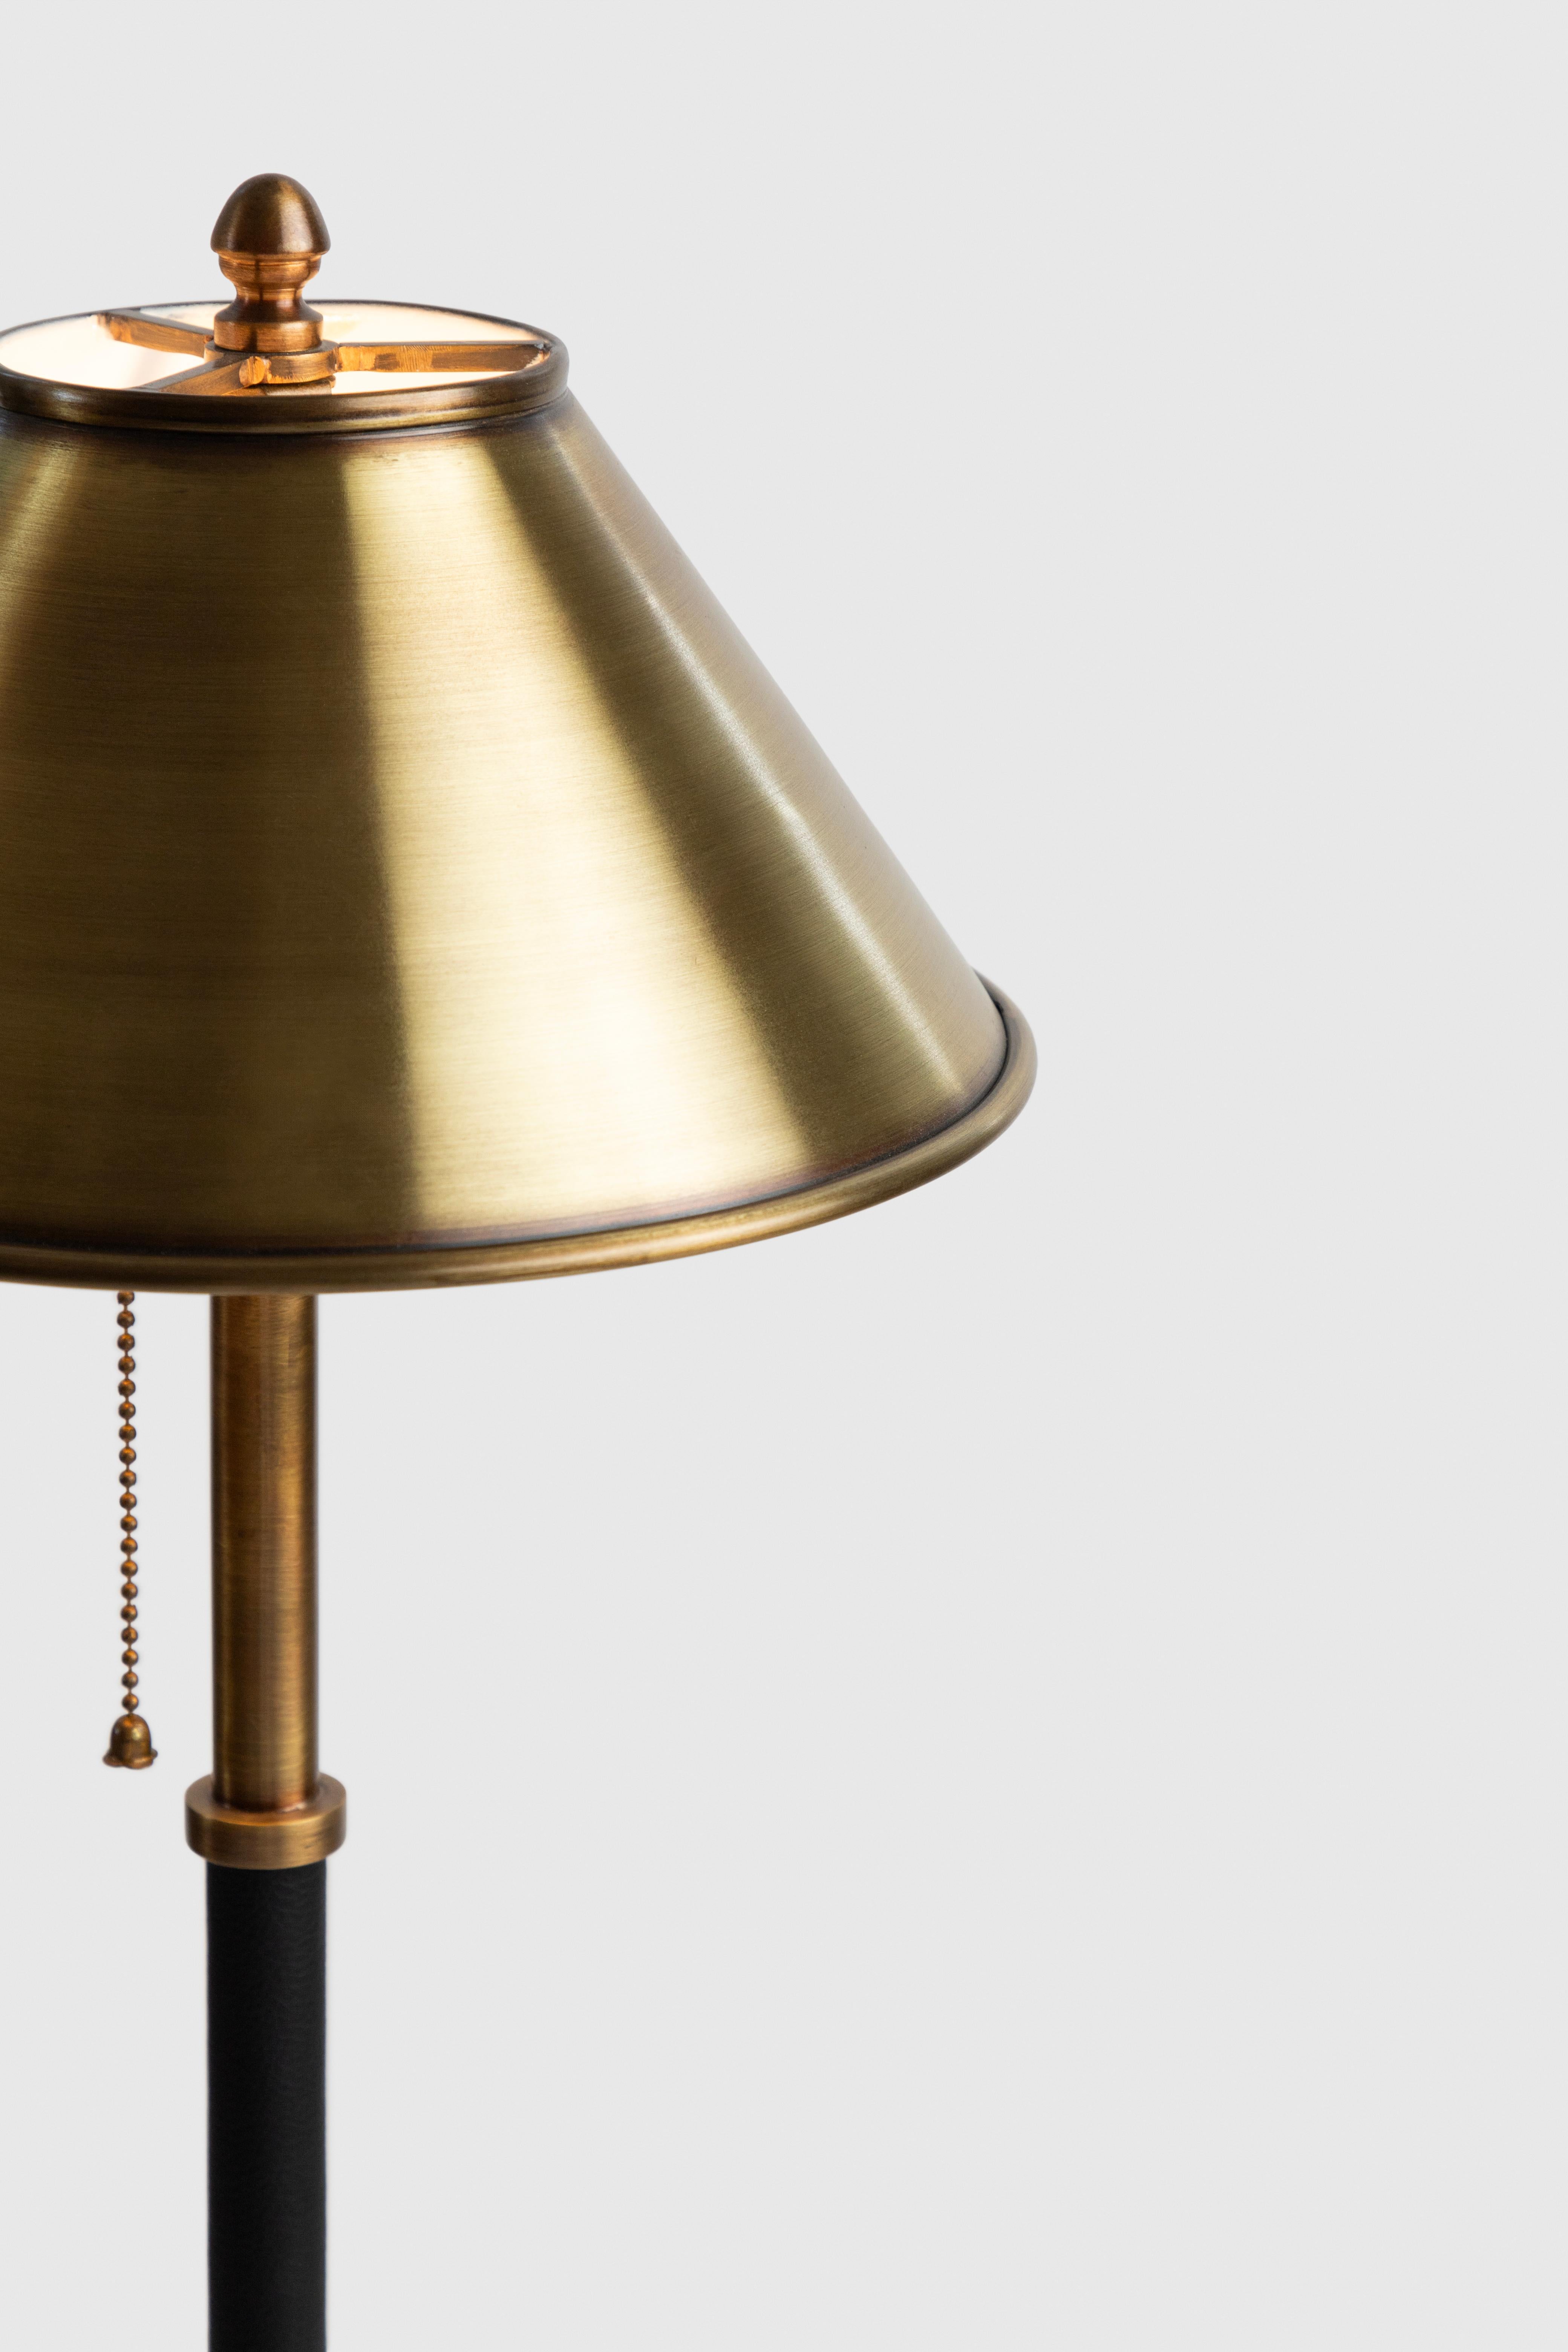 Vendôme table lamp,
Forged bronze with leather details by artisans in Mexico City. 
It has unique proportions, made with the outmost attention to detail.